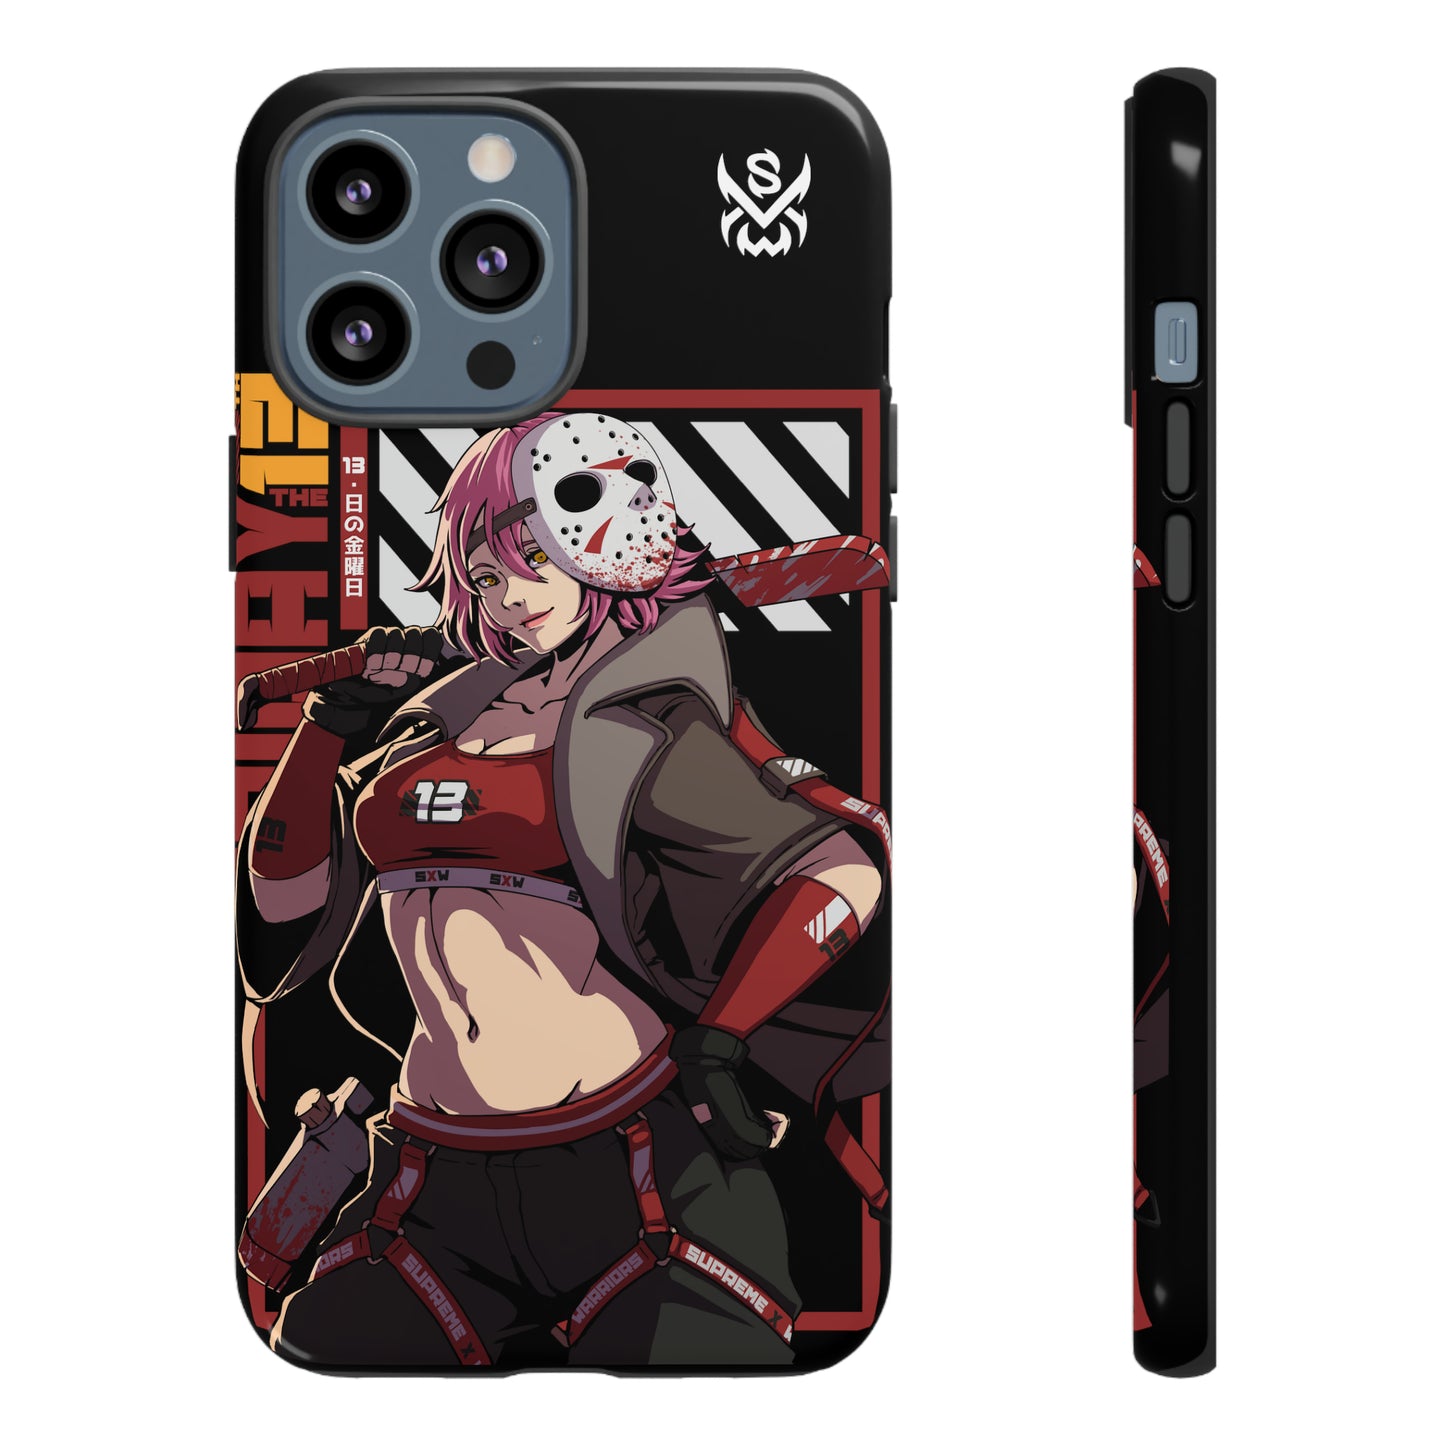 13 / iPhone Case - LIMITED